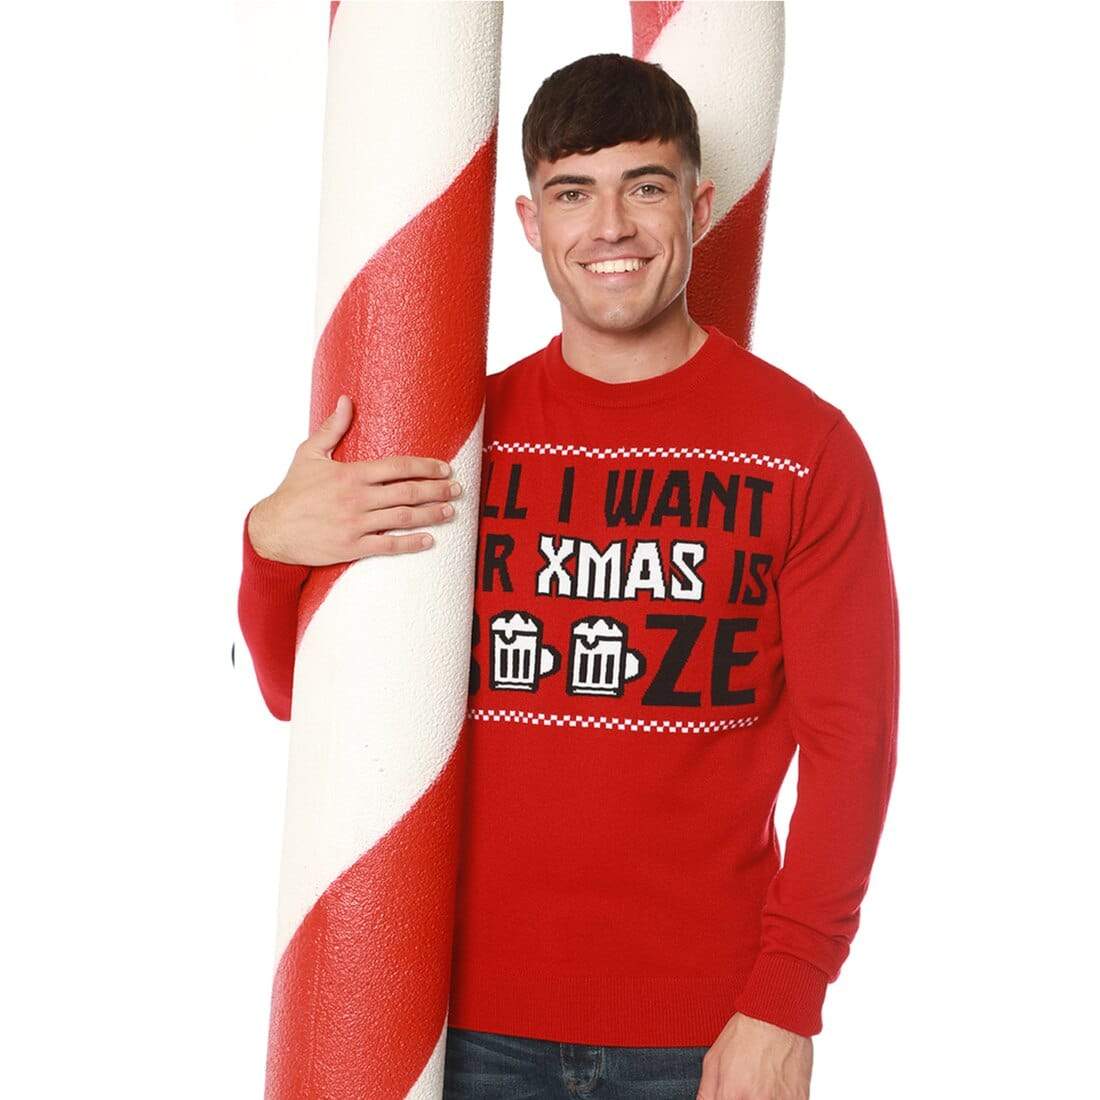 Mr Crimbo Mens All I Want For Xmas Is Booze Christmas Jumper - MrCrimbo.co.uk -SRG1A13462_A - Red -beer jumper